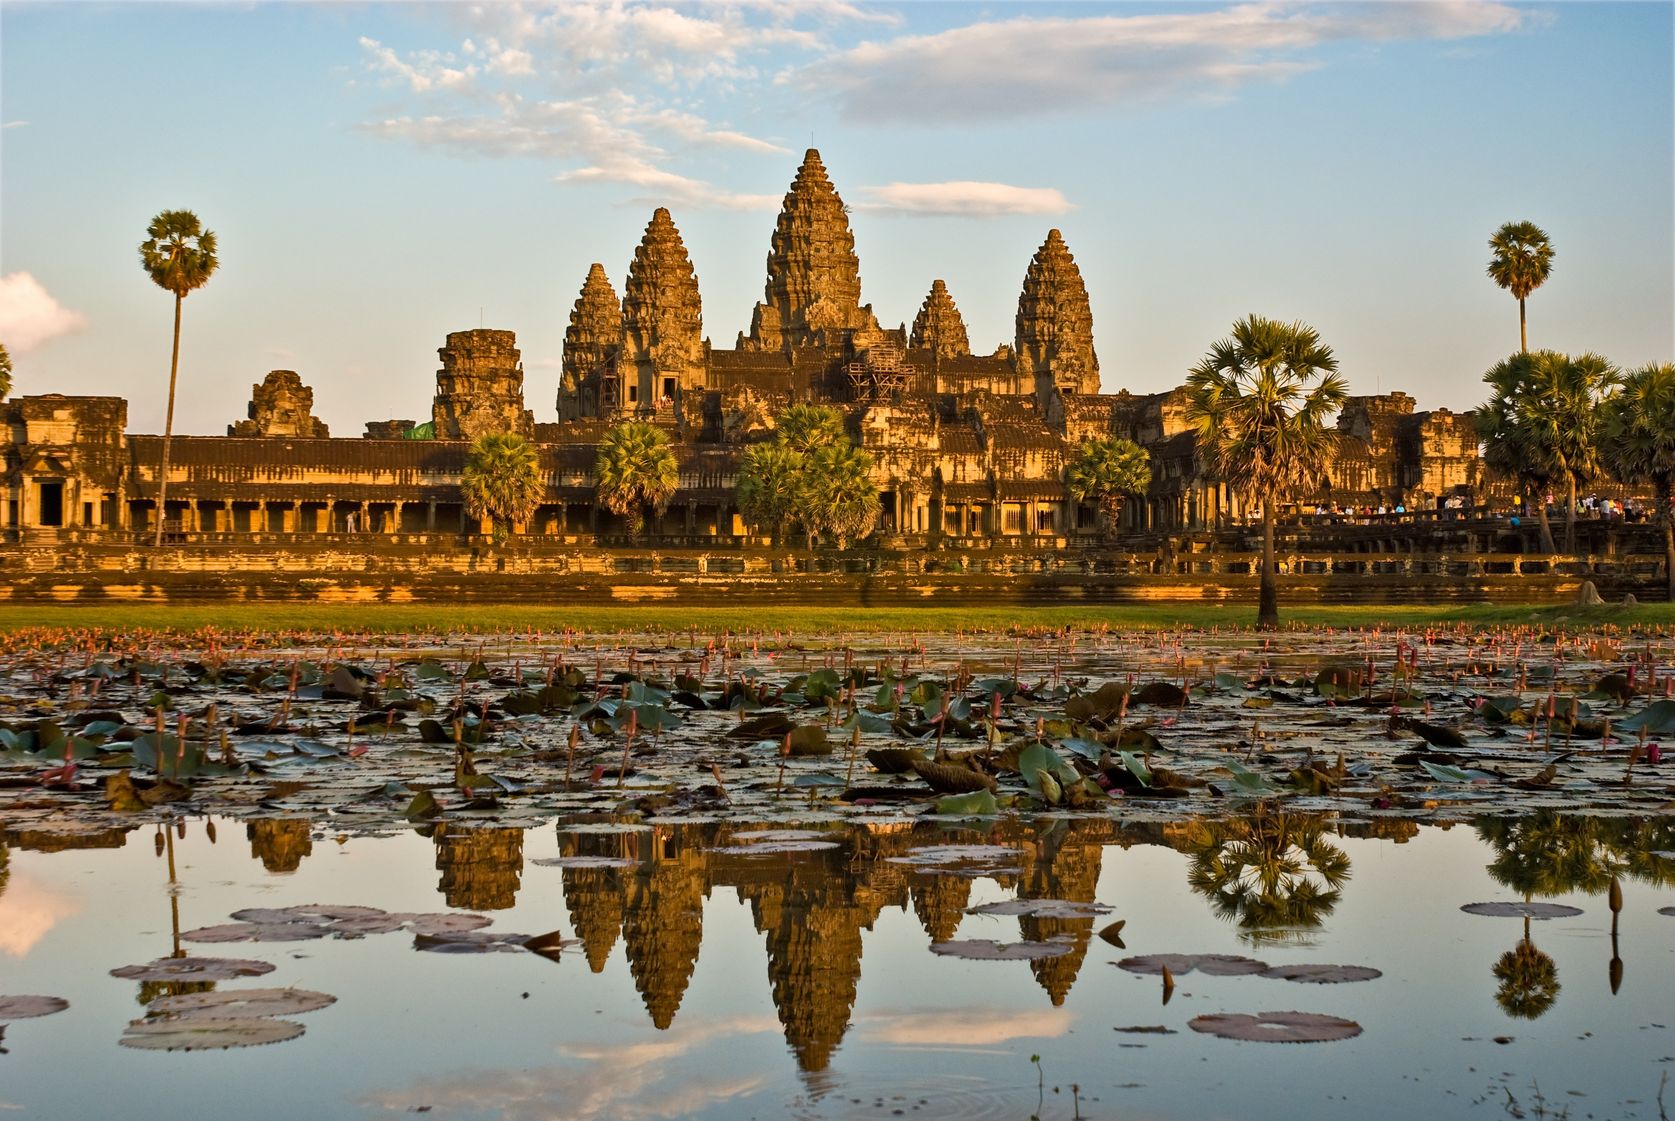 Cambodia Patent Protection System Evolves: Validation Of European Patents Takes Effect.